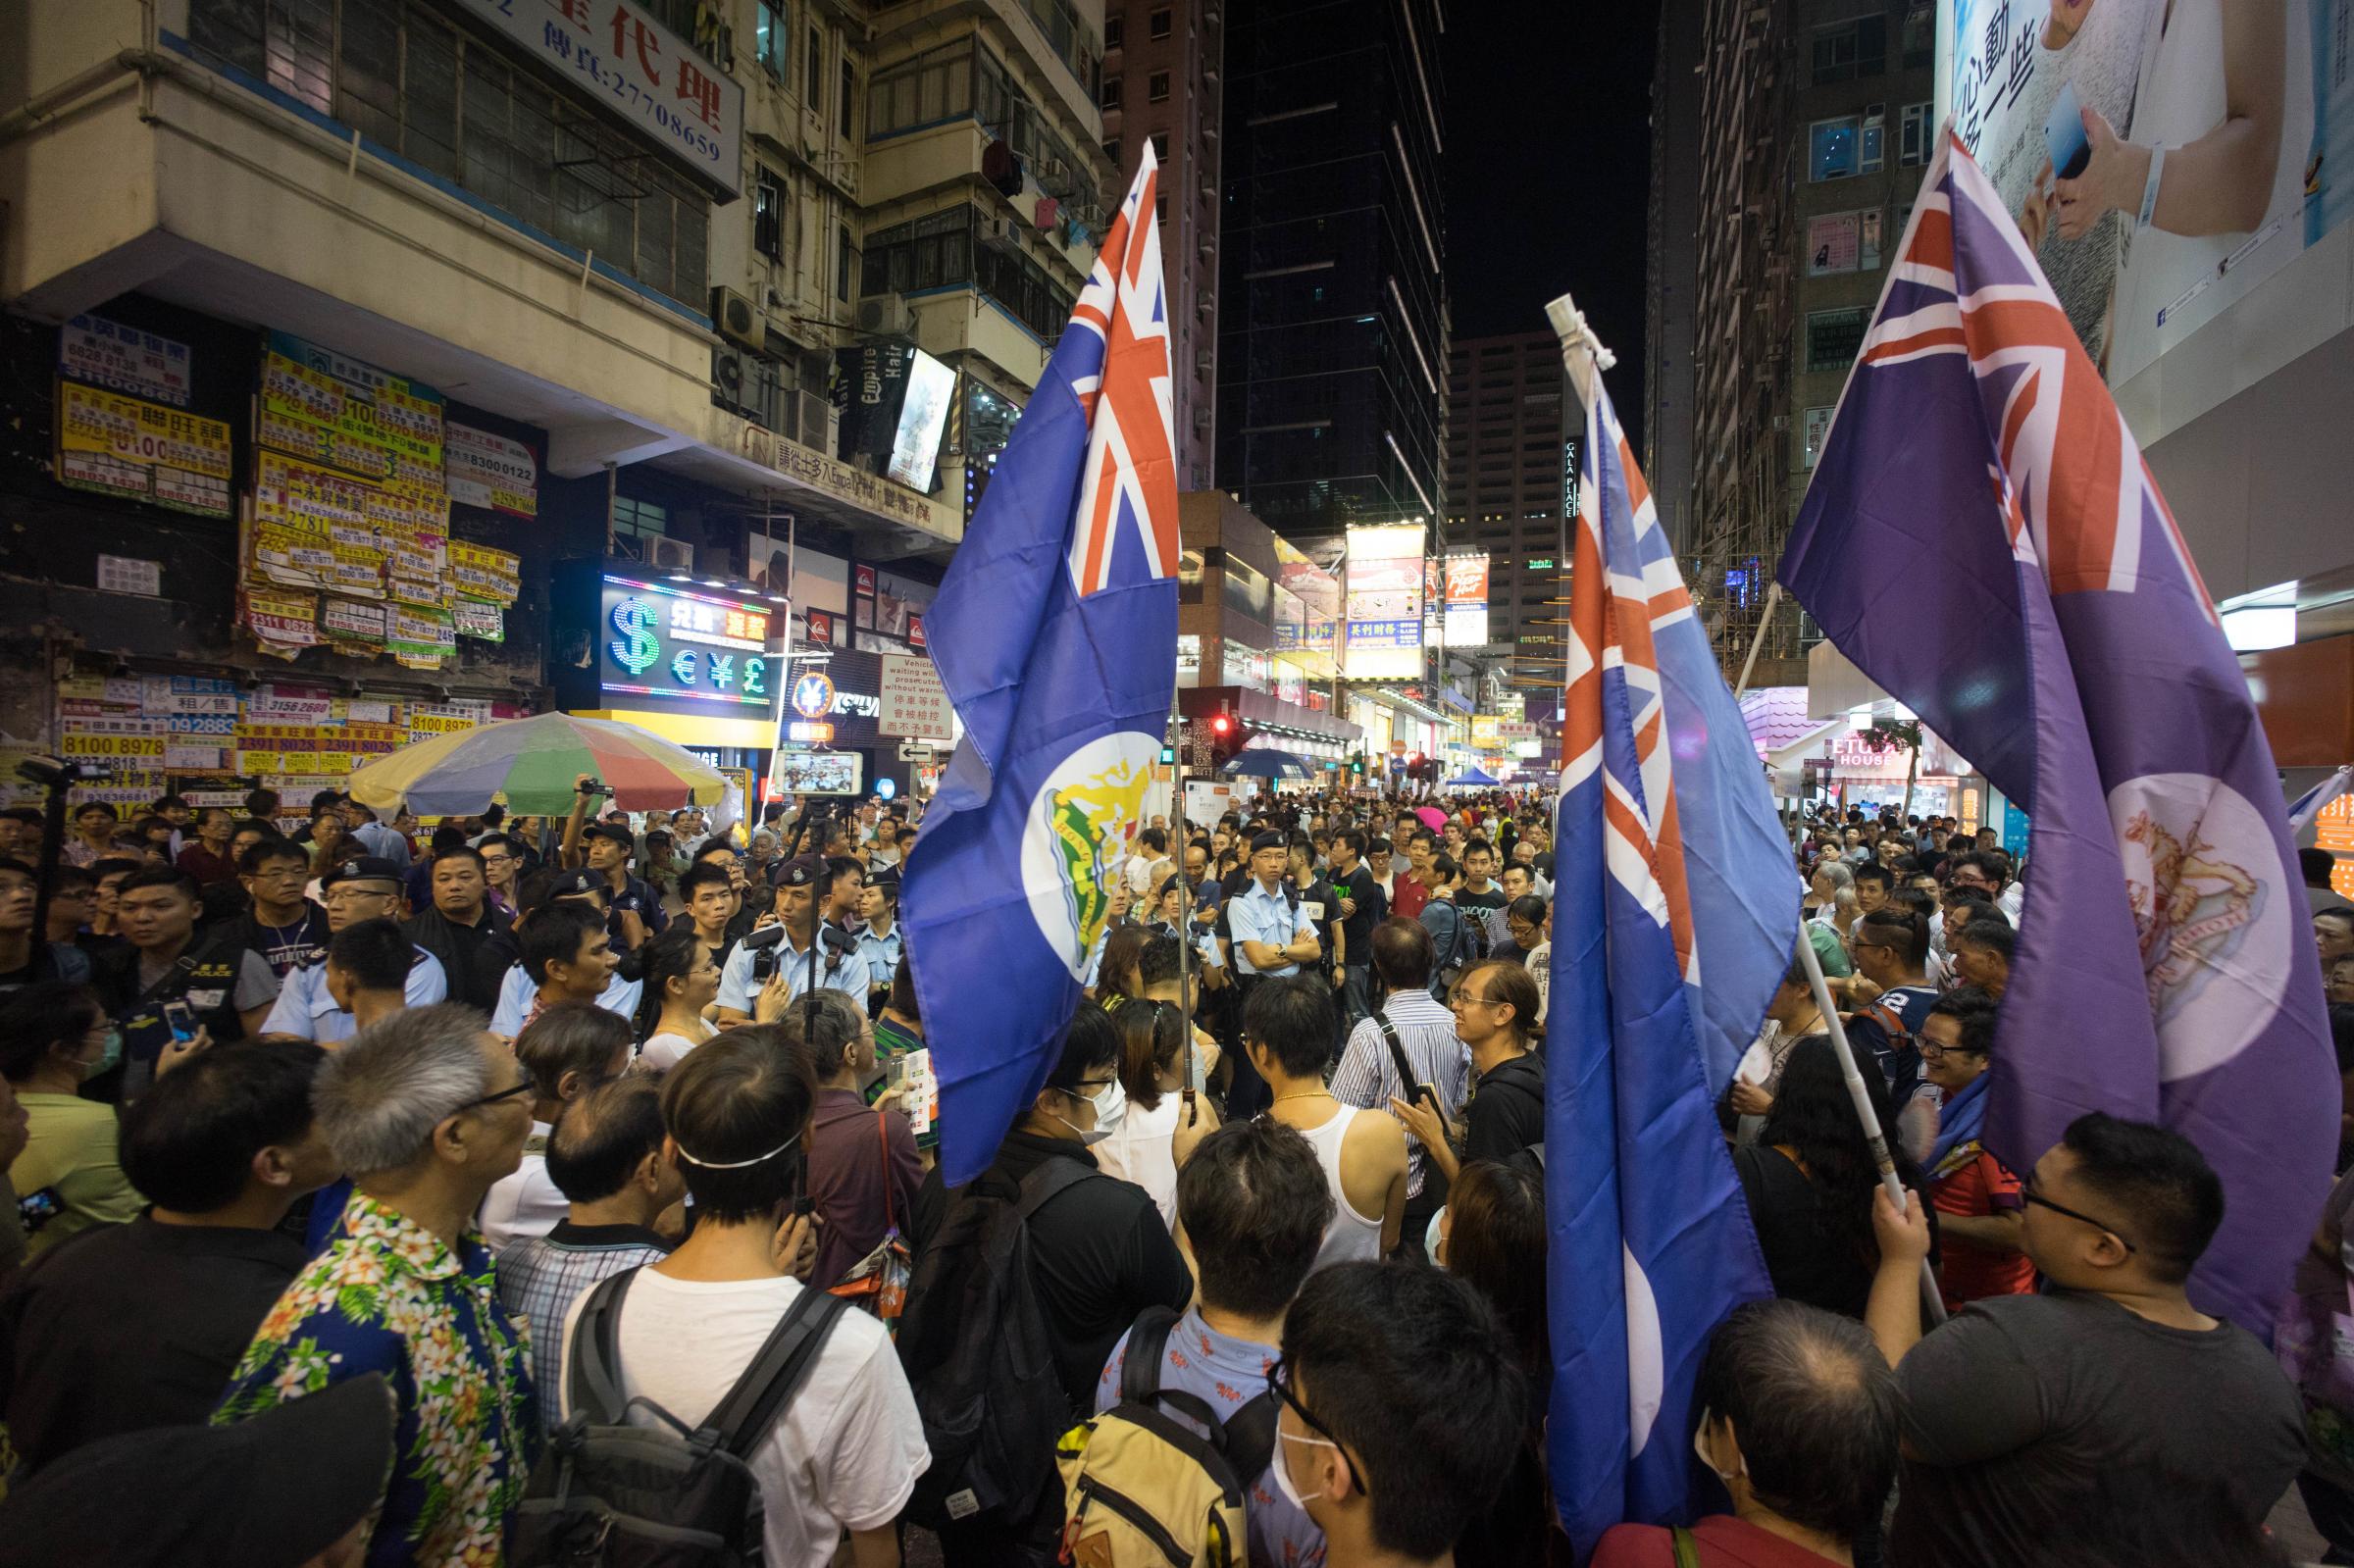 MONG KOK, HONG KONG - 2015/08/02: Pro democracy localists seen waving the British colonial flag as they protest against the pro Beijing street performers. Police force was deployed to protect the Pro Beijing street performers on their meeting with the Pro Democracy local protesters in the shopping district of Mong Kok. (Photo by Geovien So/Pacific Press/LightRocket via Getty Images)